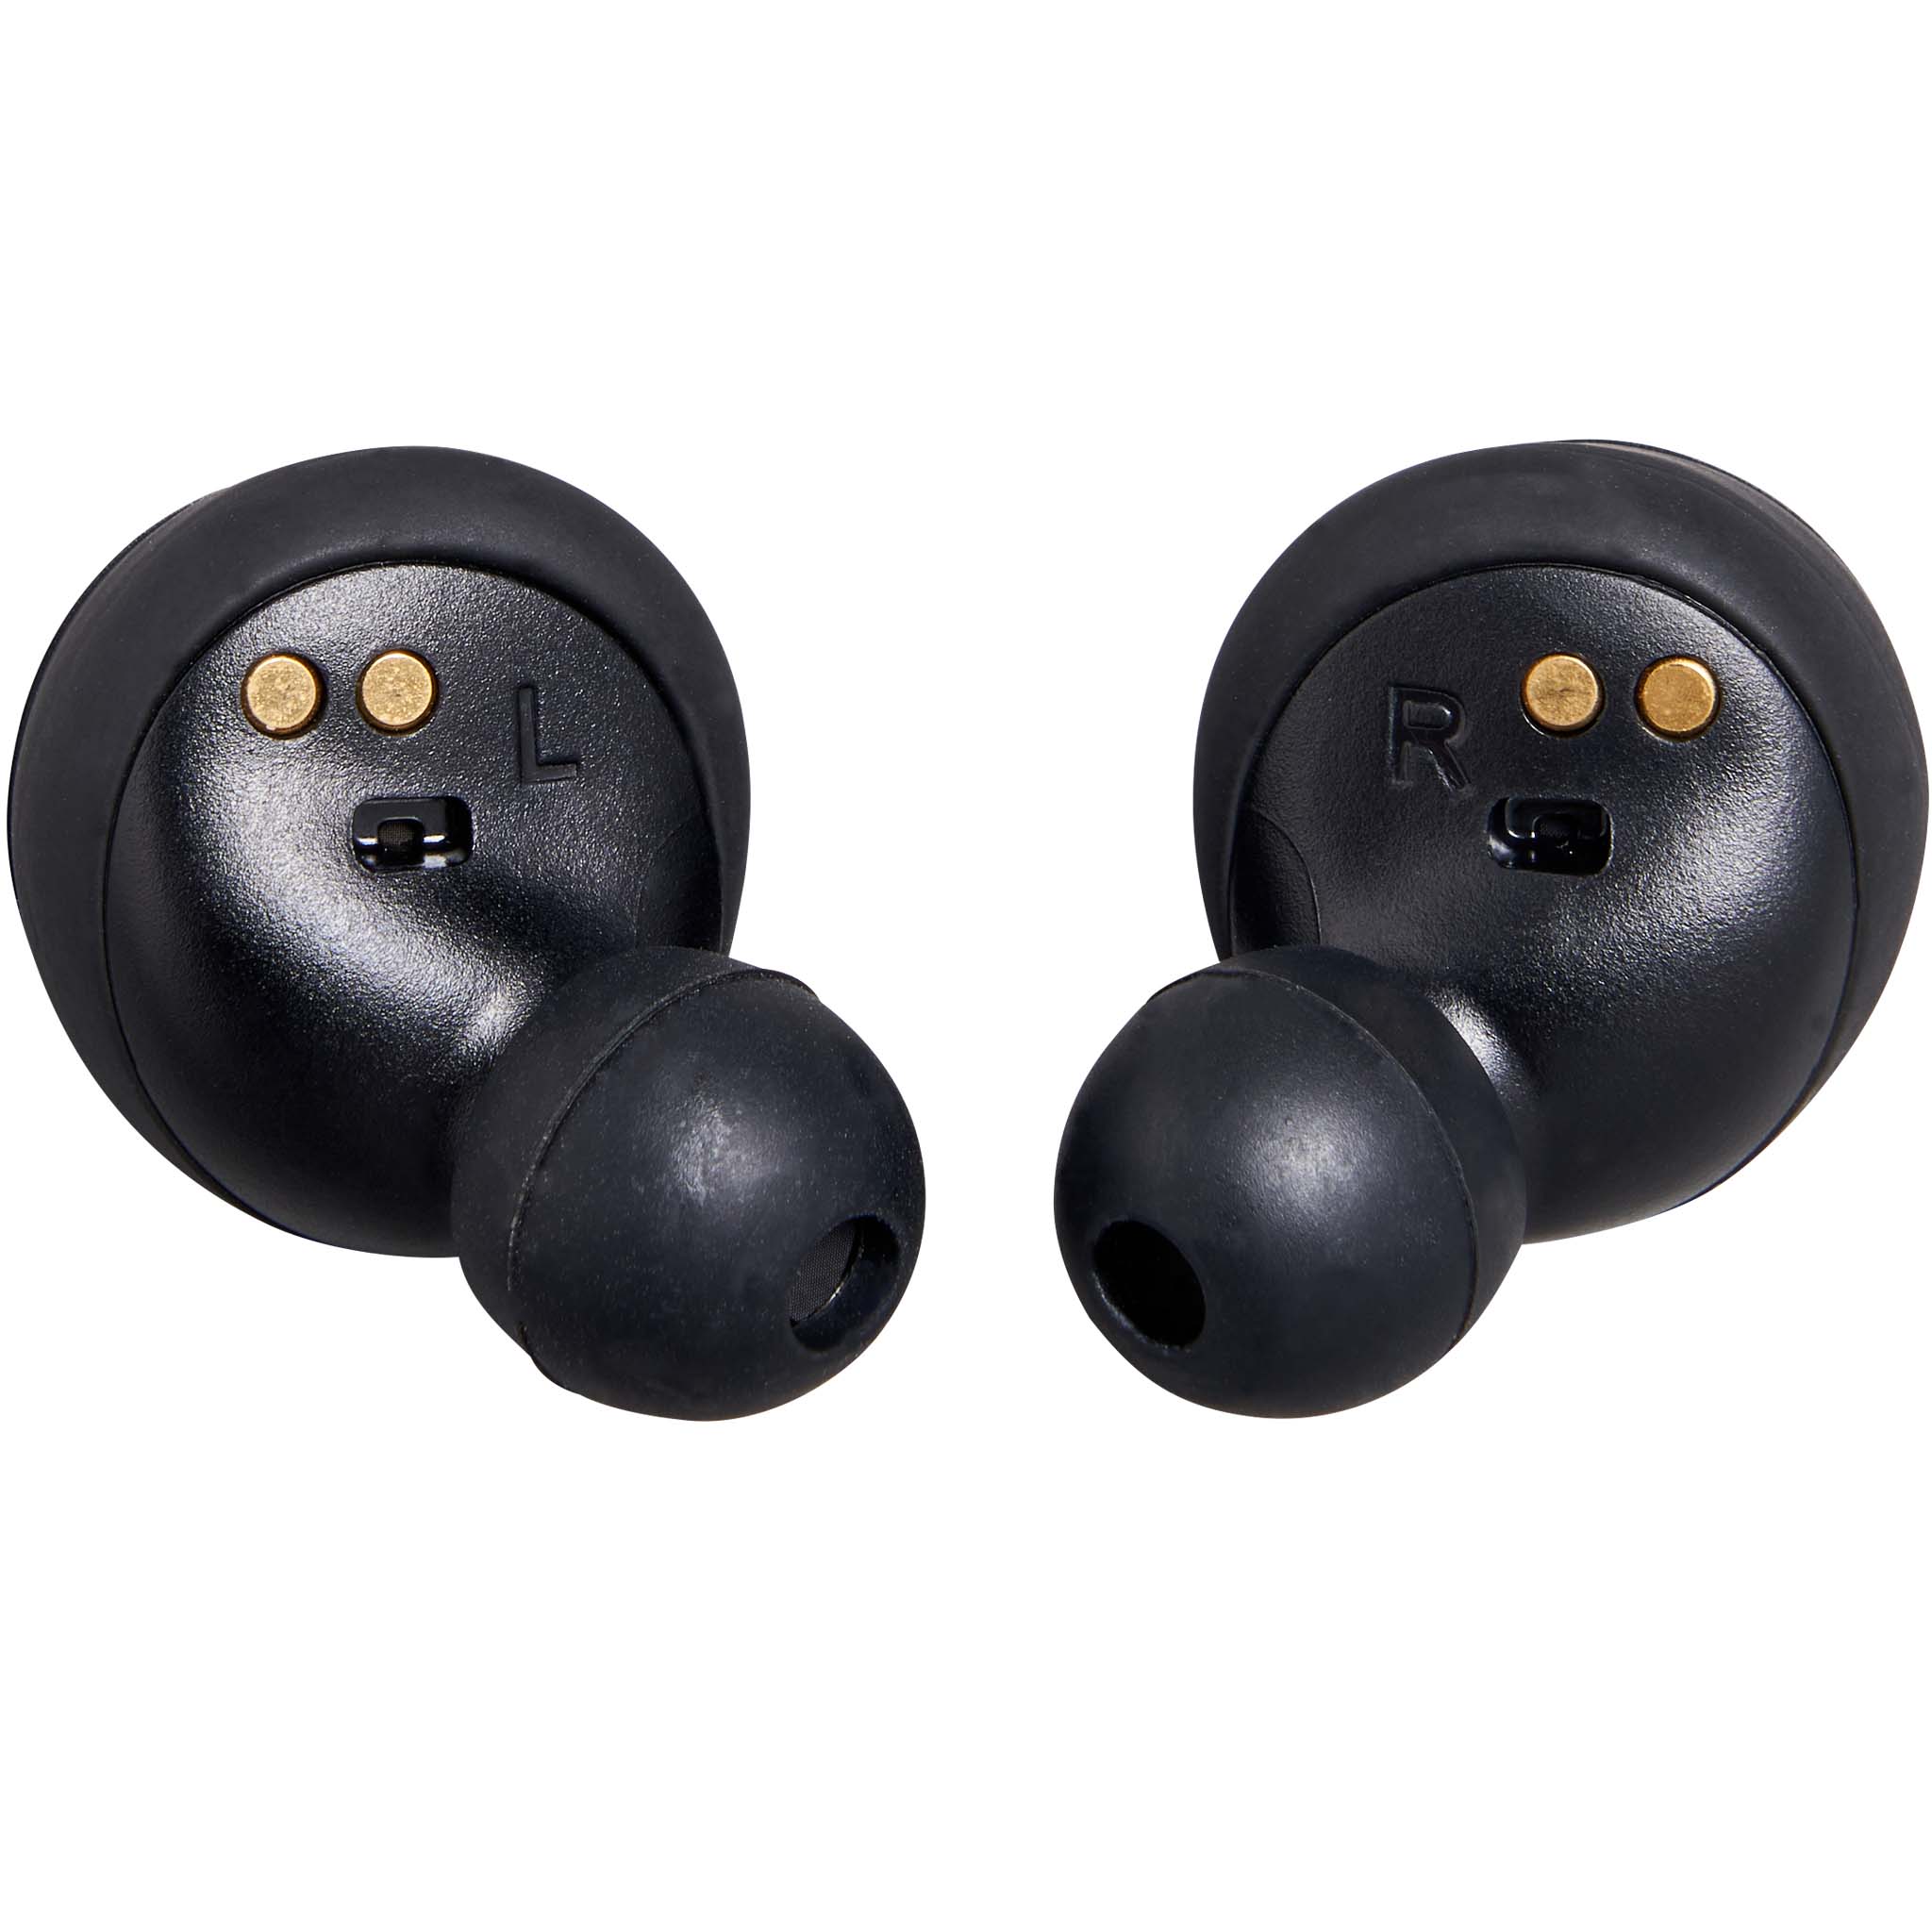 Pearls Earbuds with Rechargeable Case